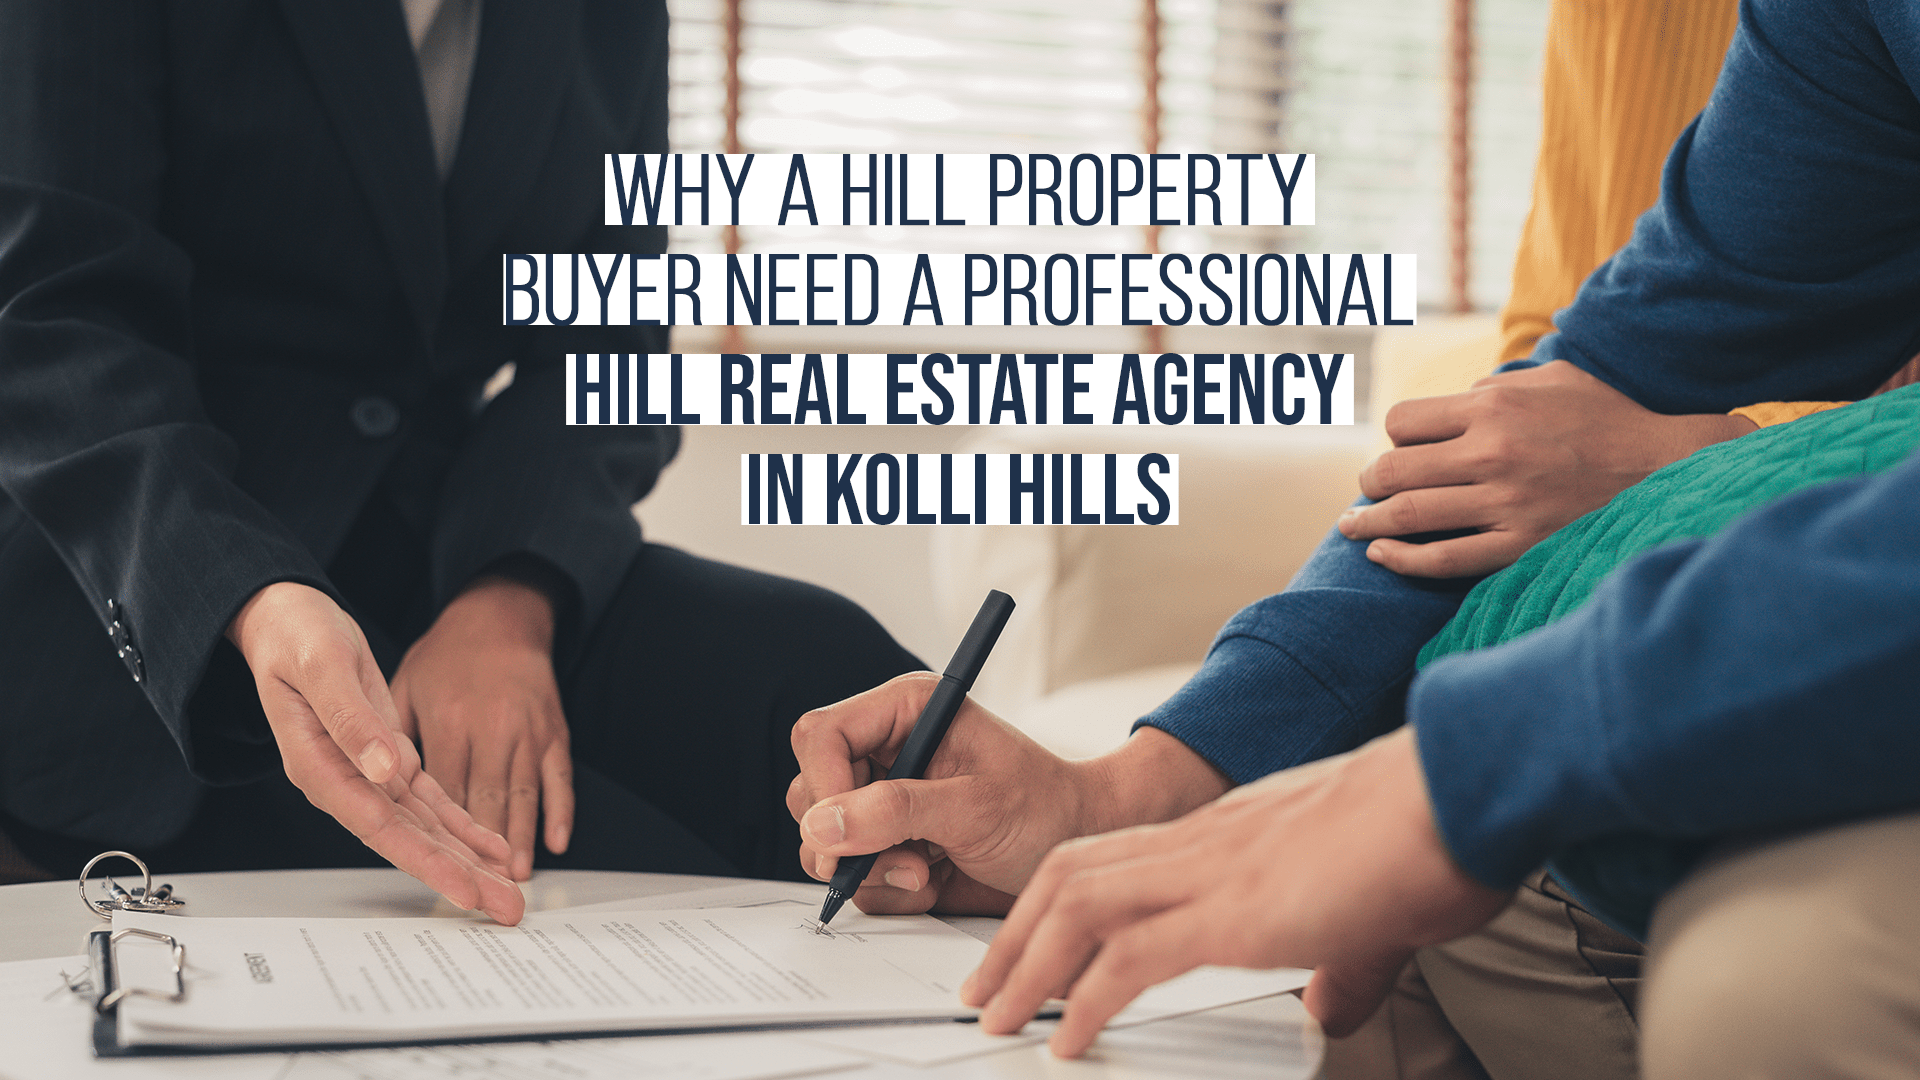 Why a Property Buyer need A  Professional Hill Real Estate Agency in Kolli Hills?